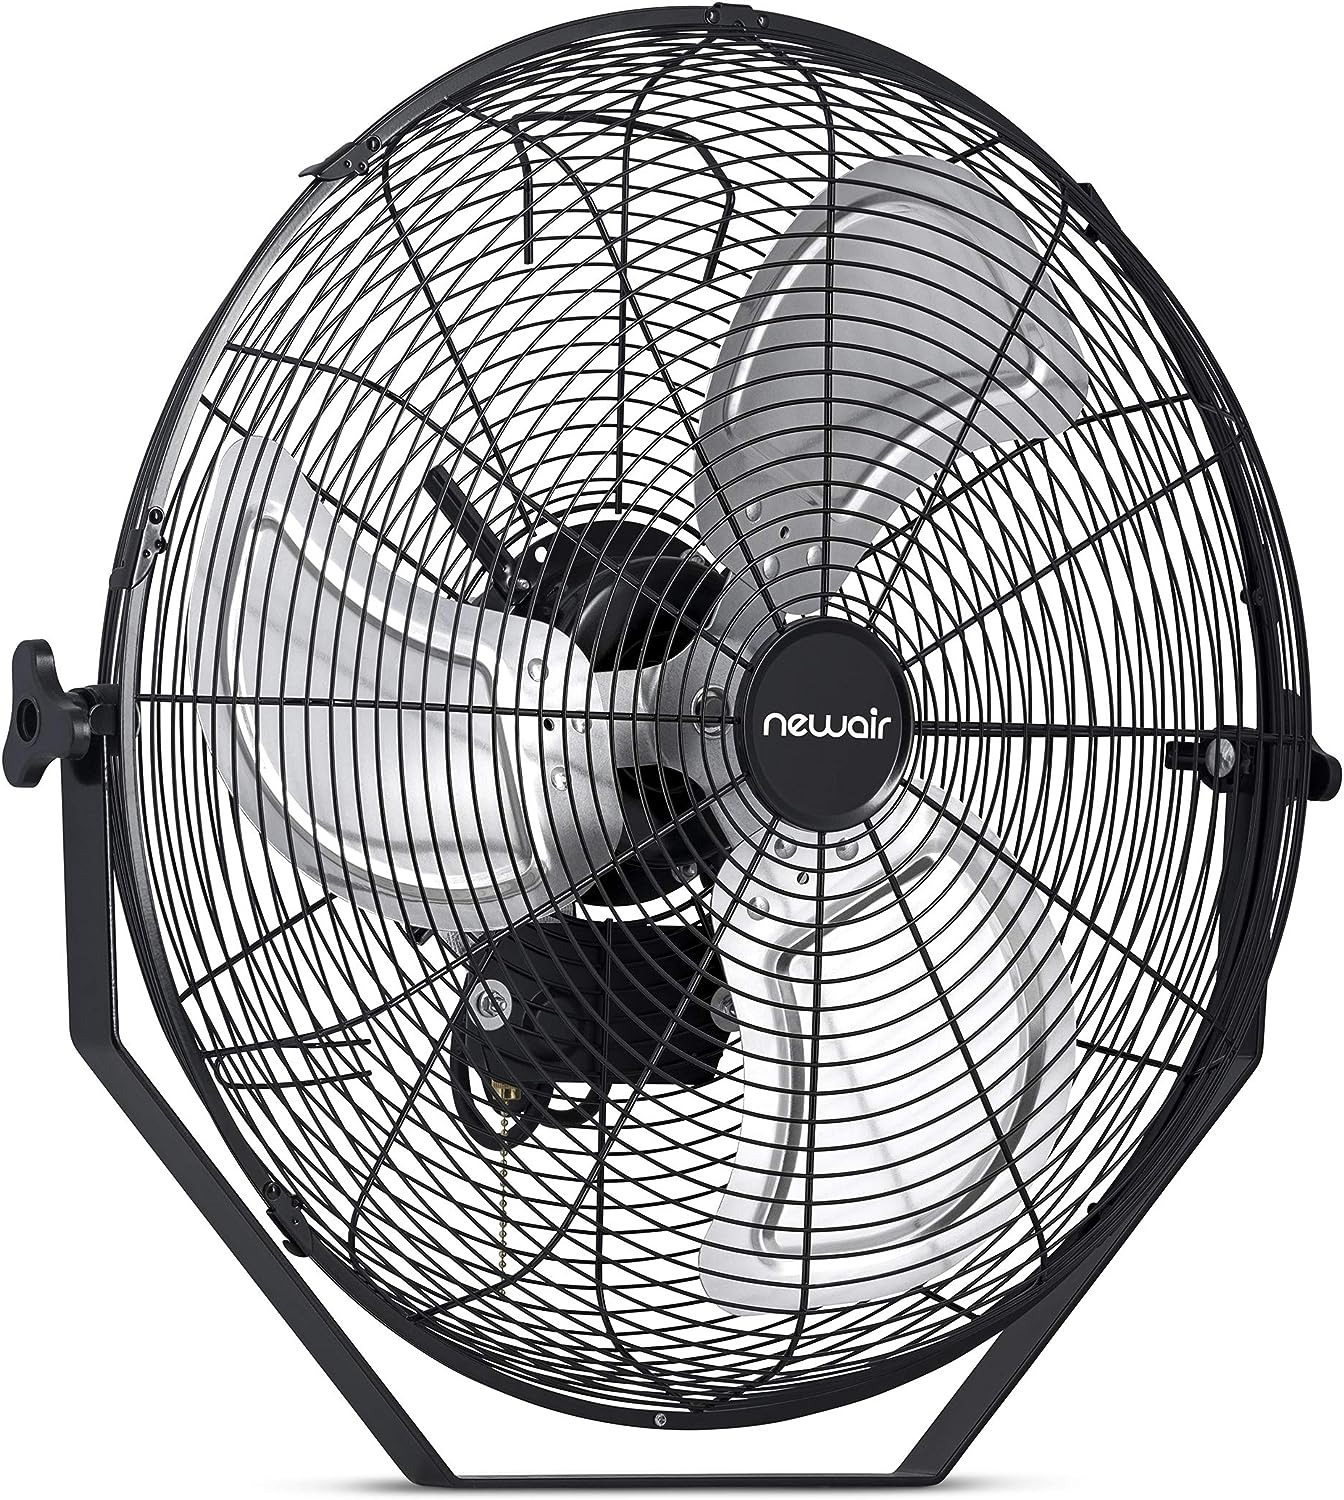 Newair 20" Water Resistant Outdoor Wall Mounted Fan (Factory Refurbished) $89 + Free Shipping